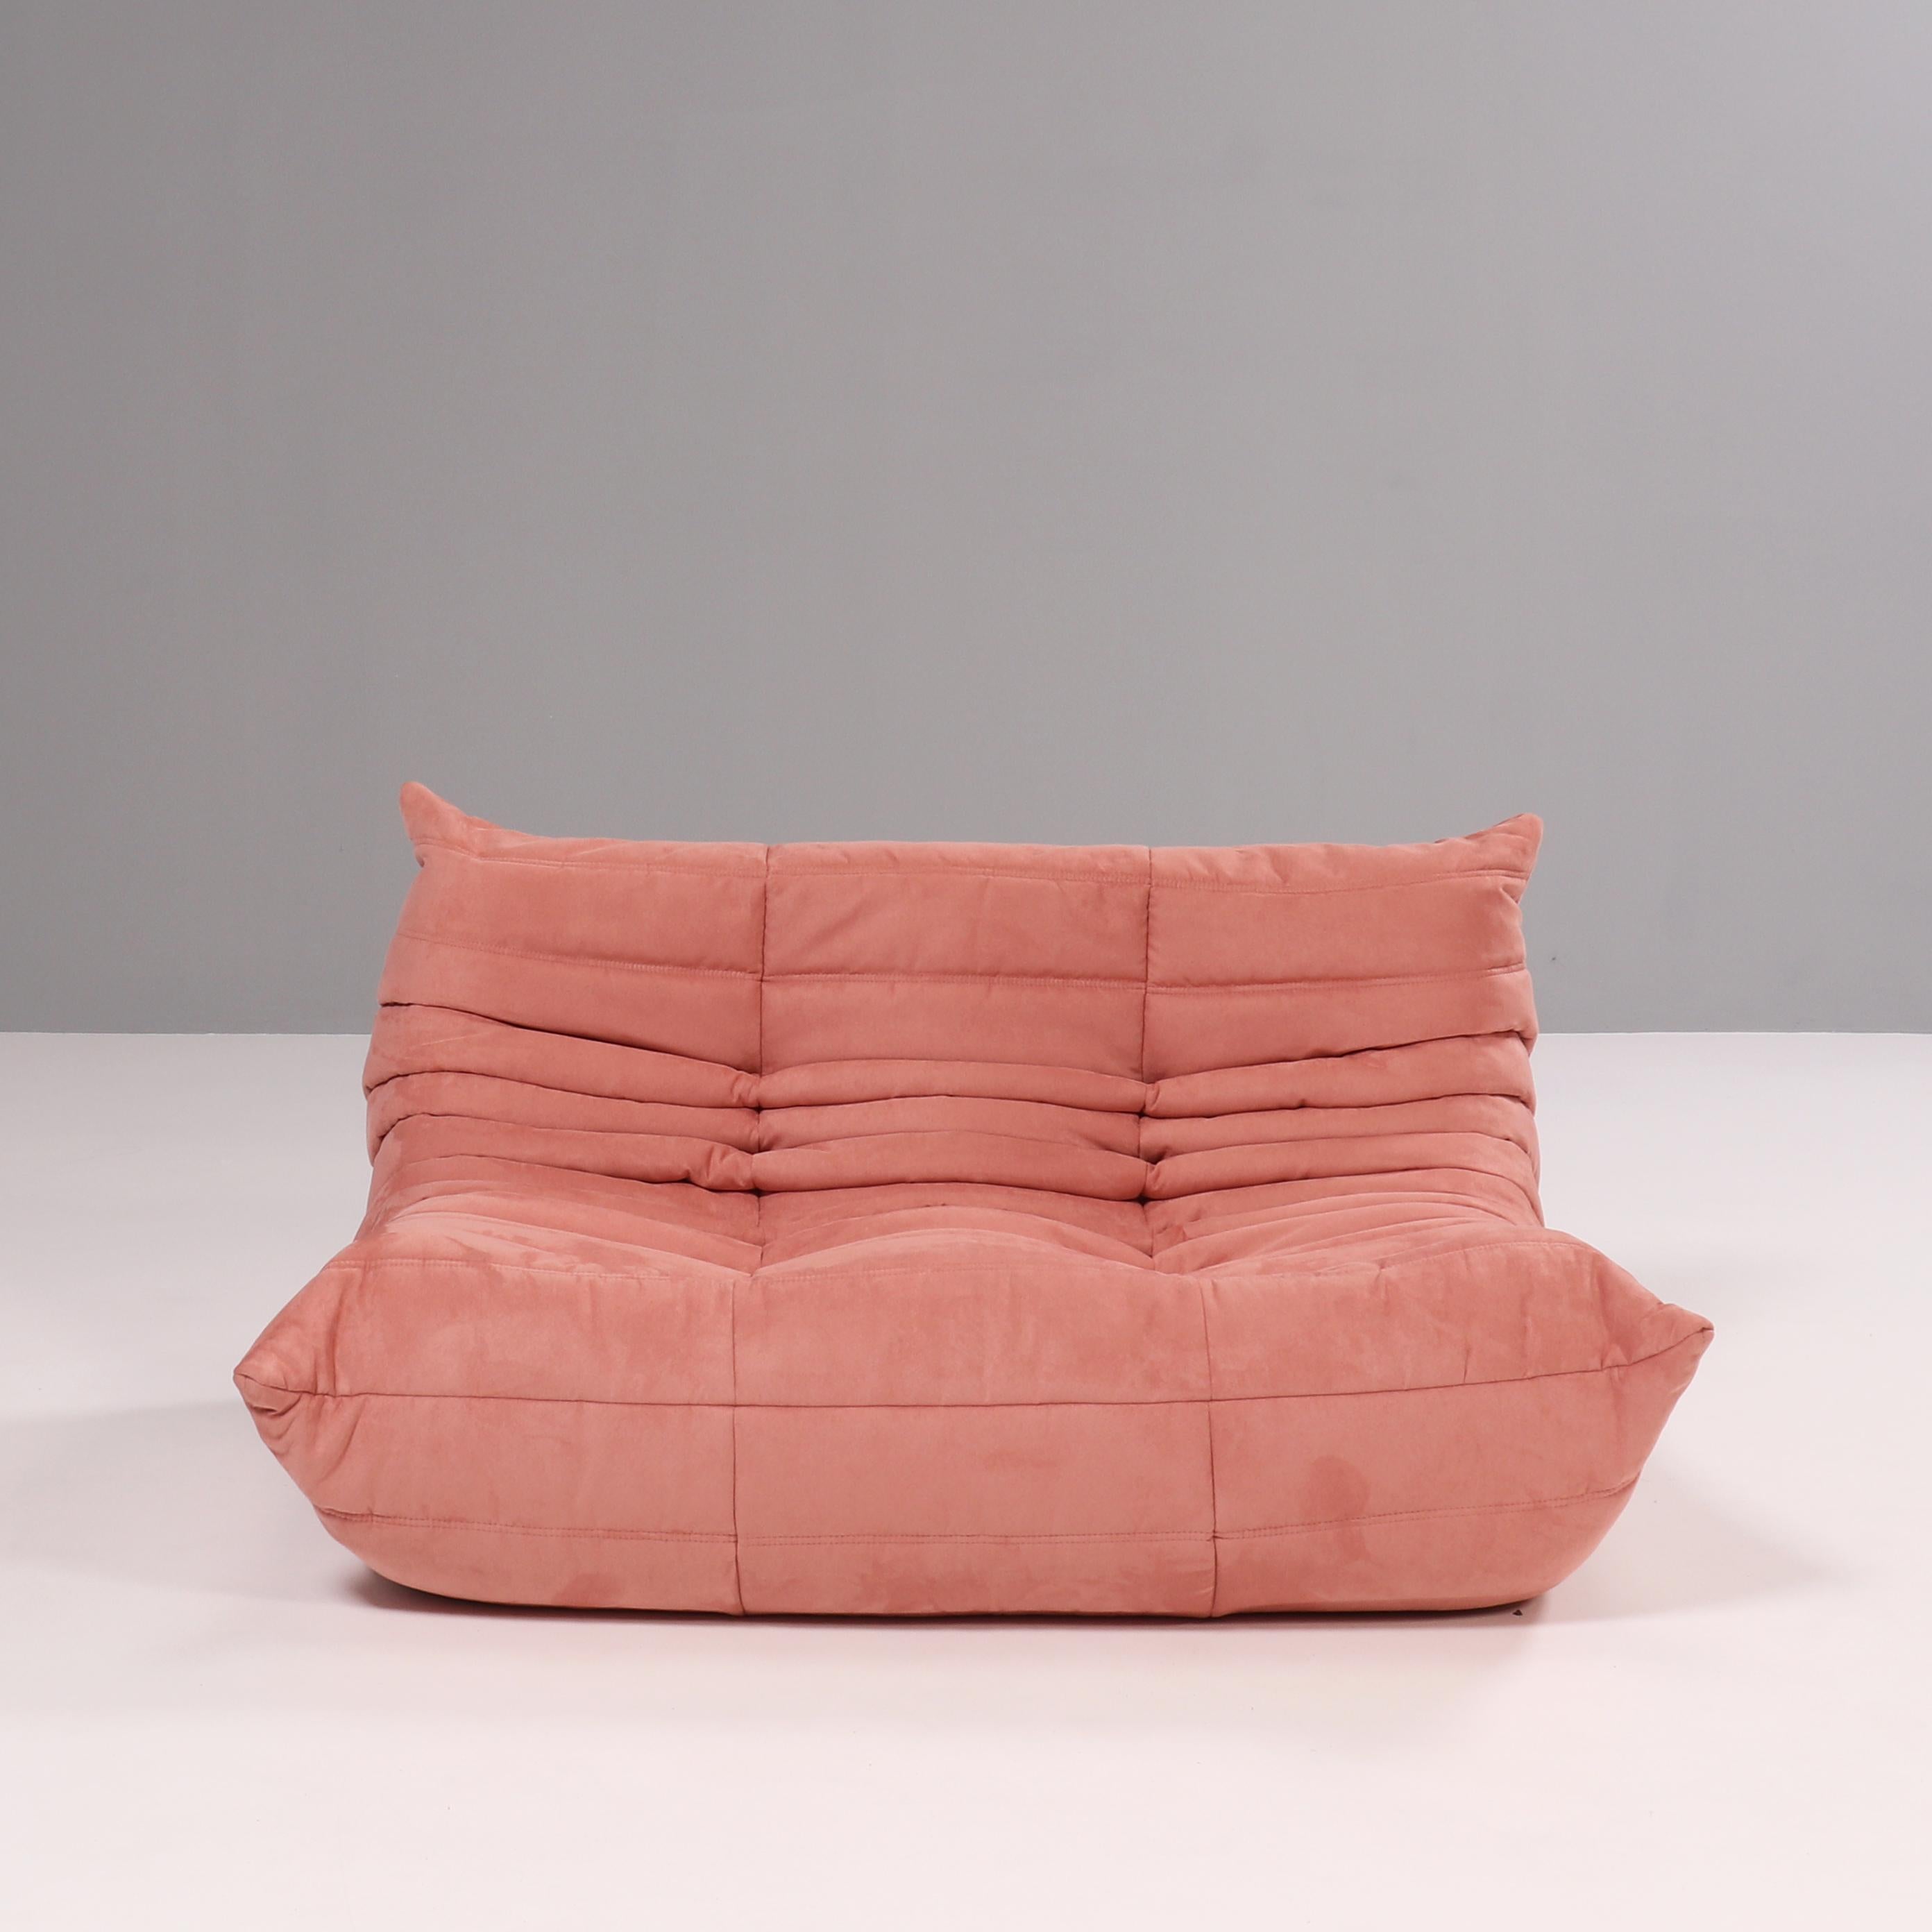 Fabric Ligne Roset by Michel Ducaroy Togo Pink Modular Sofa and Footstool, Set of 3